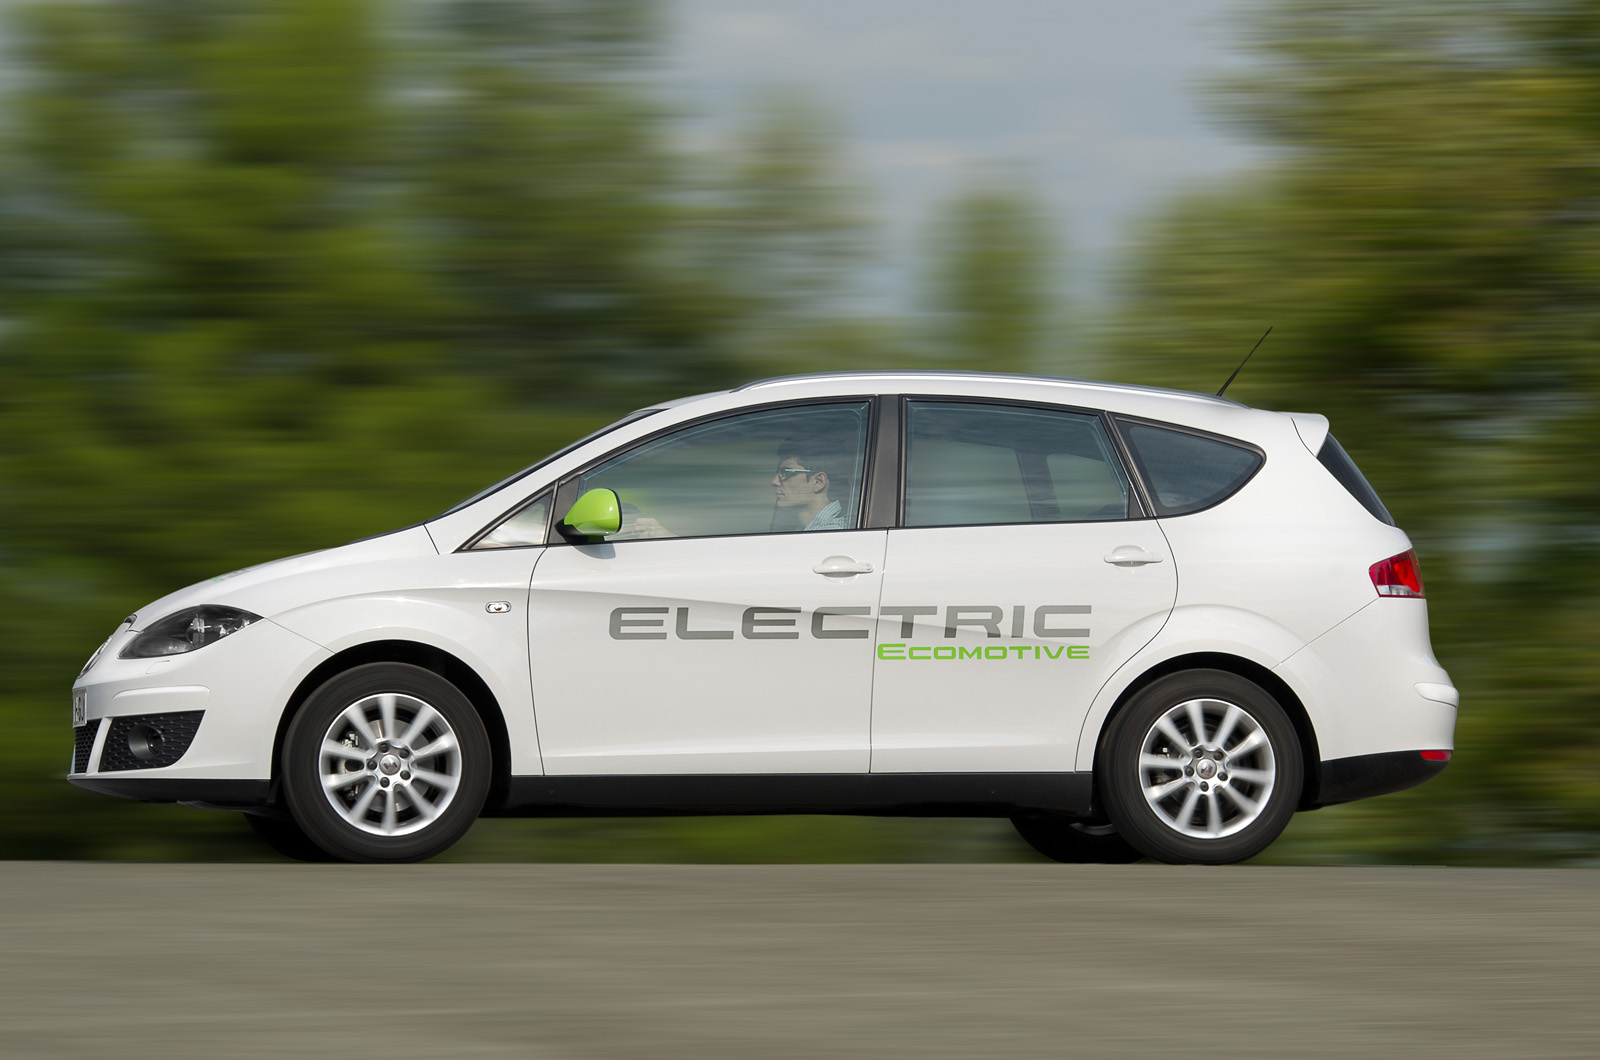 SEAT Altea XL Electric Ecomotive coming in 2015 - Drive